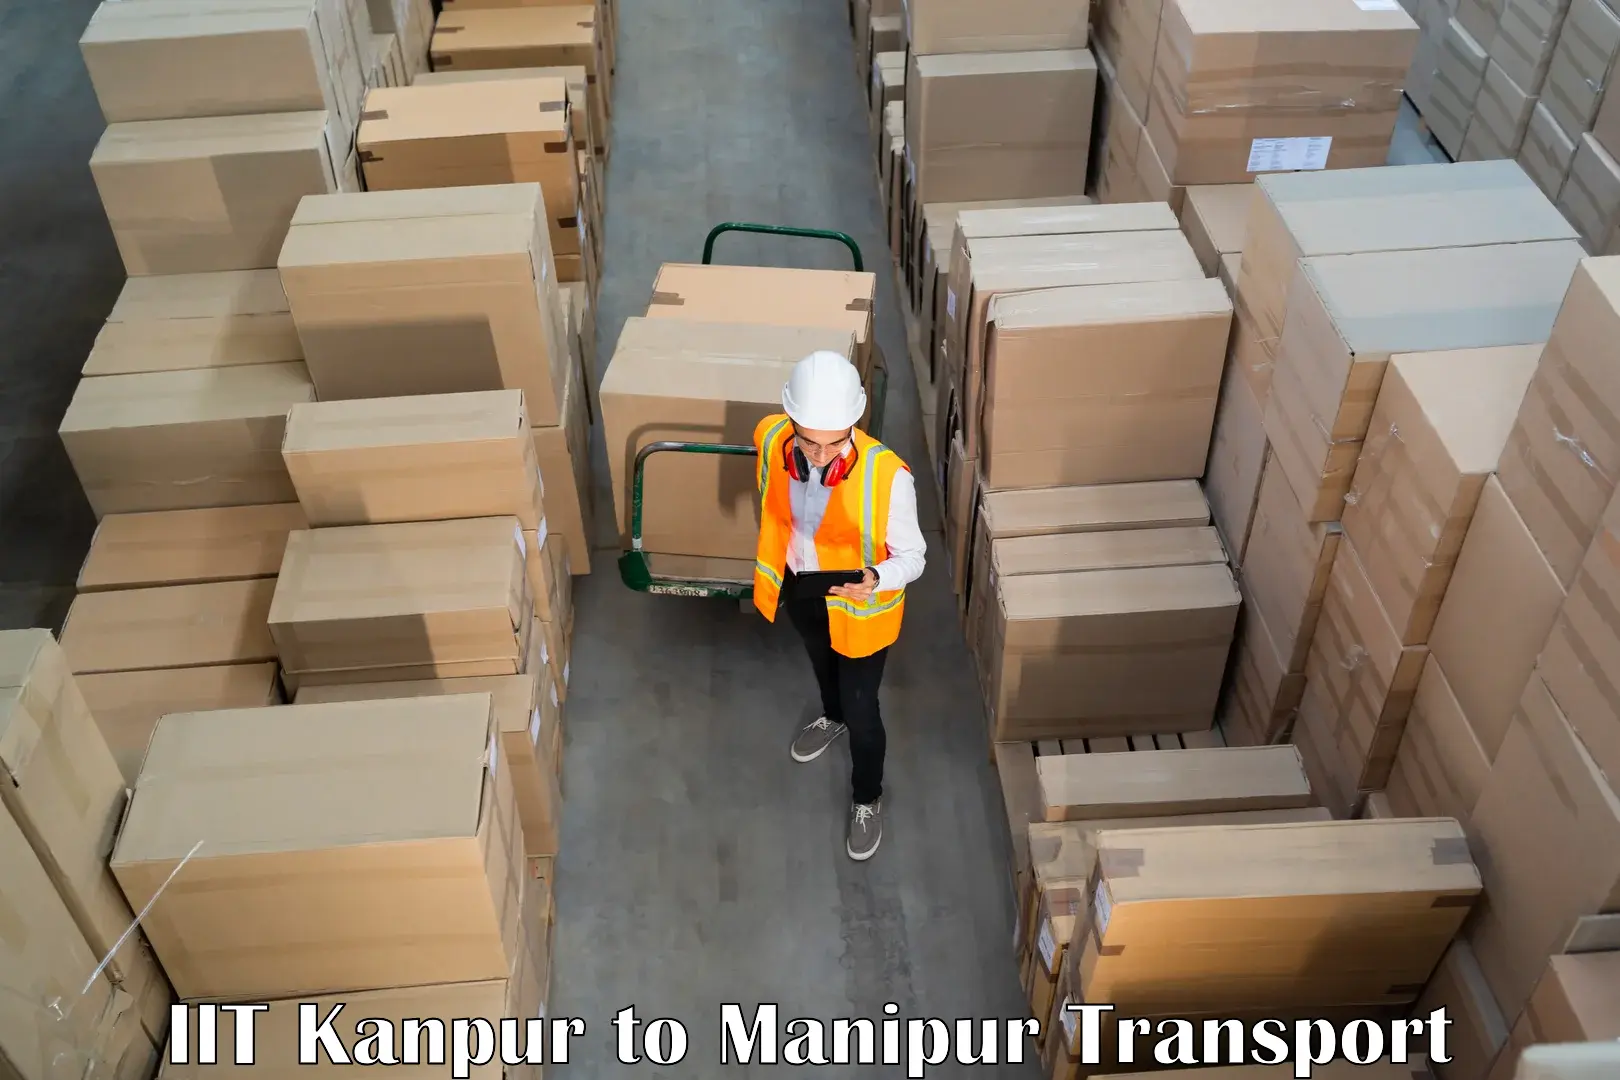 Lorry transport service IIT Kanpur to Manipur